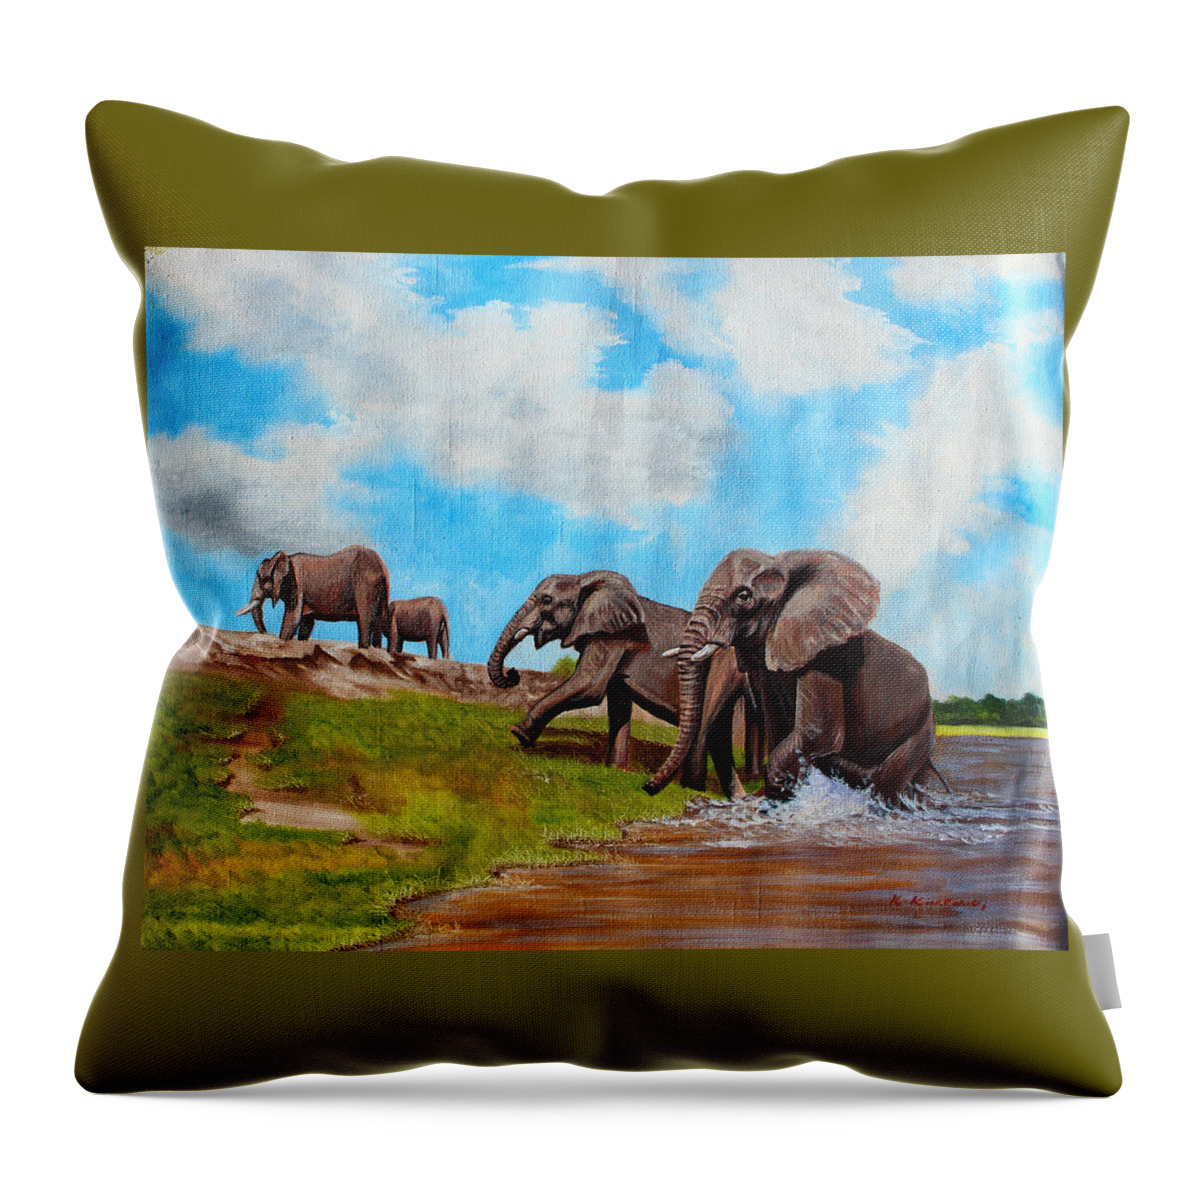 True African Art Throw Pillow featuring the painting The Elephants Rise by Richard Kimenia